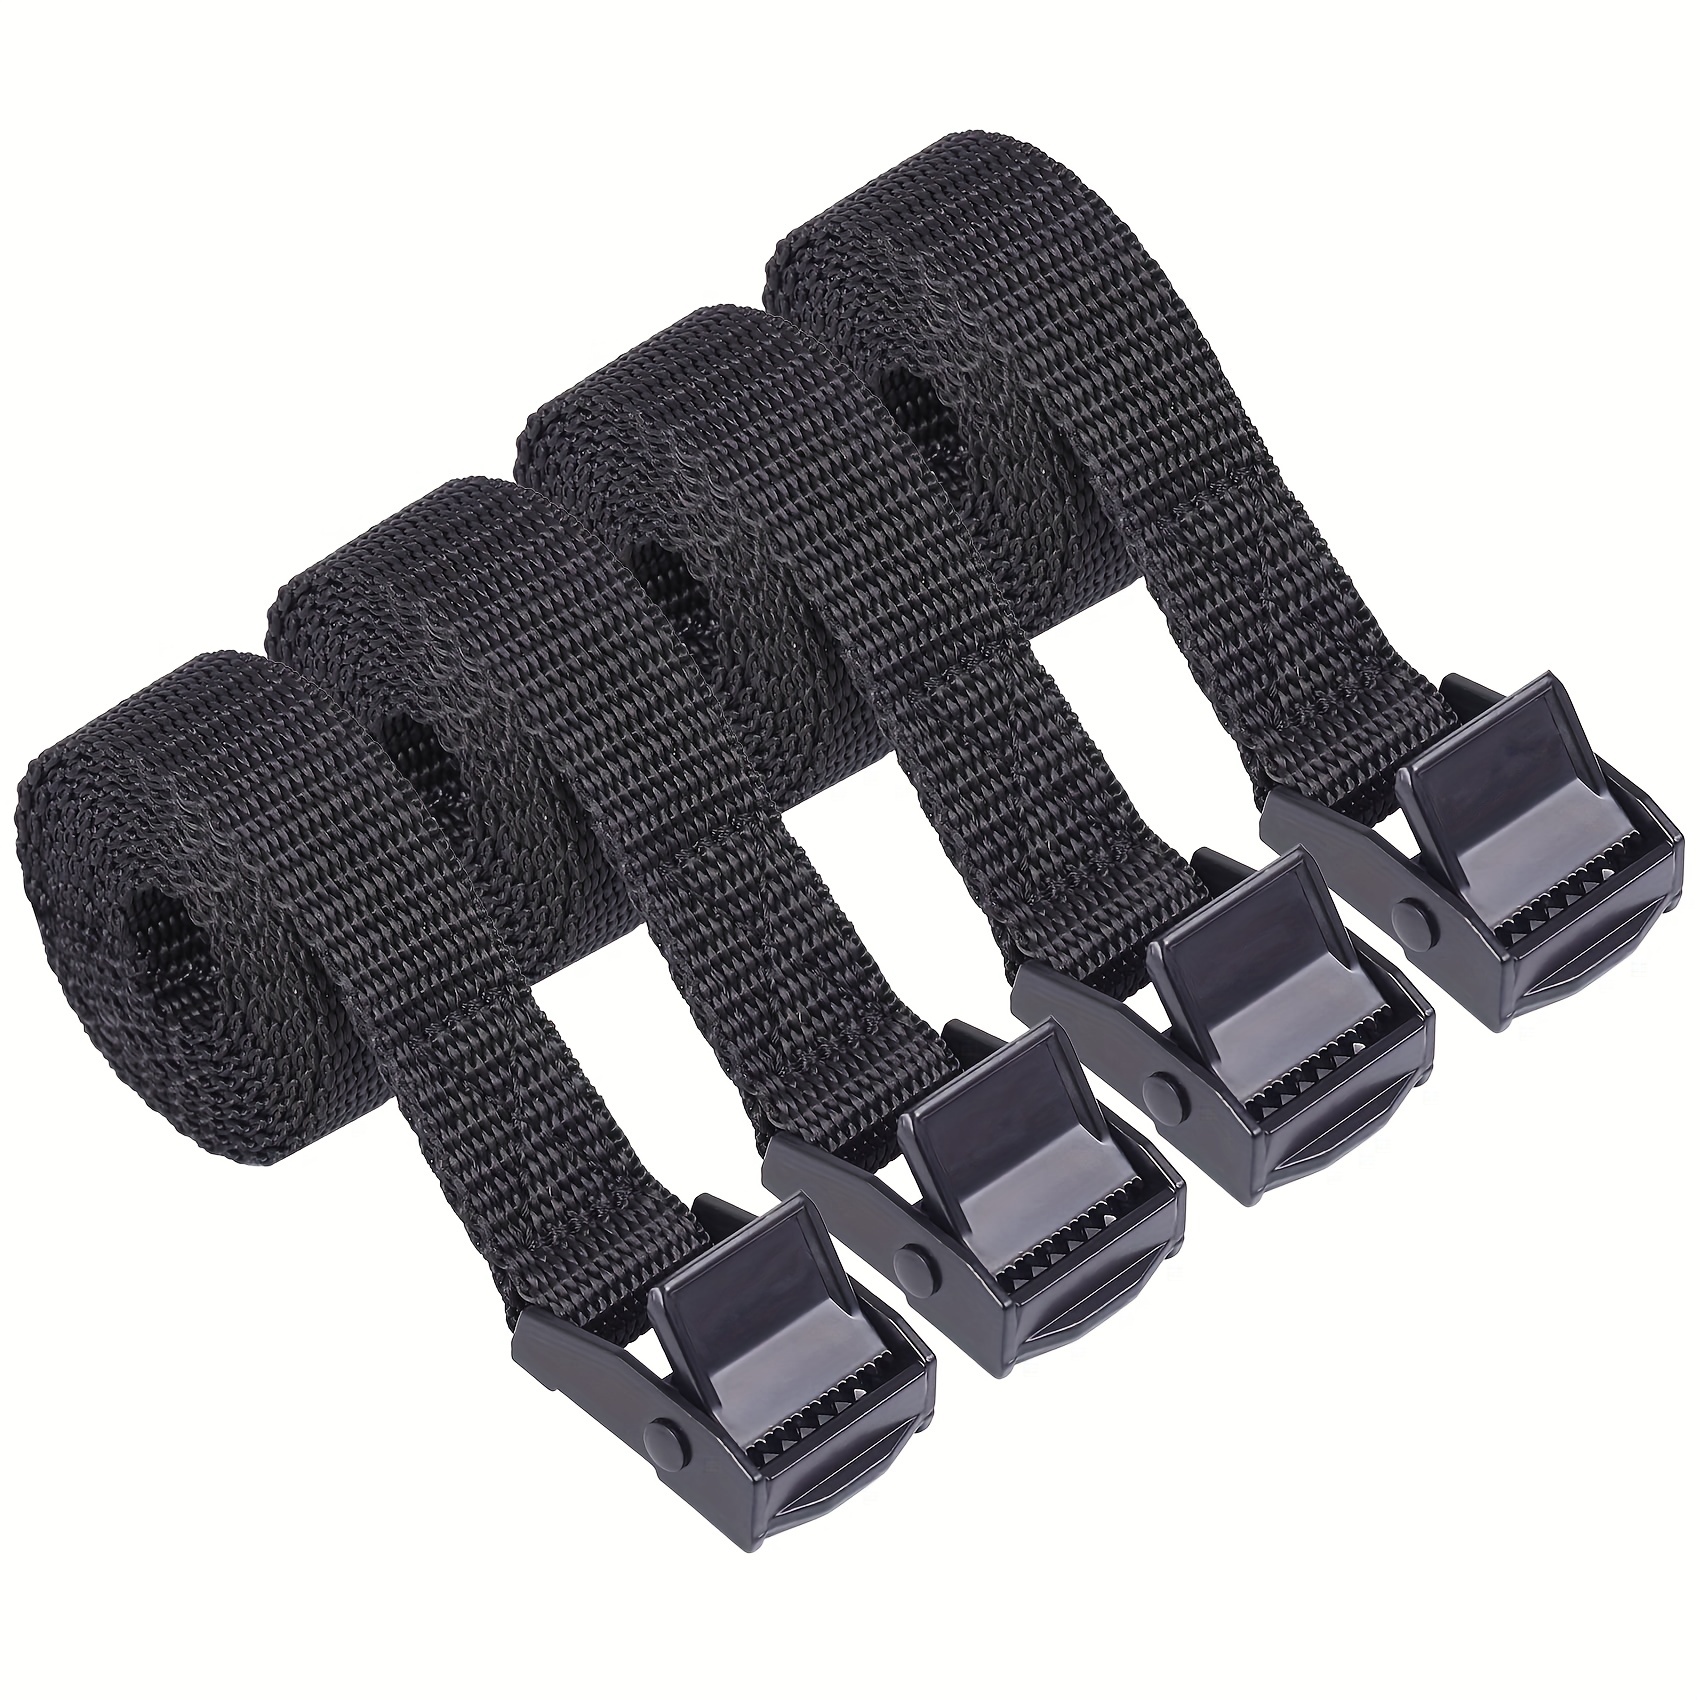 Utility Straps Tie Down Straps with Buckle Quick-Release Adjustable Nylon  Camping Sleeping Bag Straps Black 4 Pack (6 feet, Black)